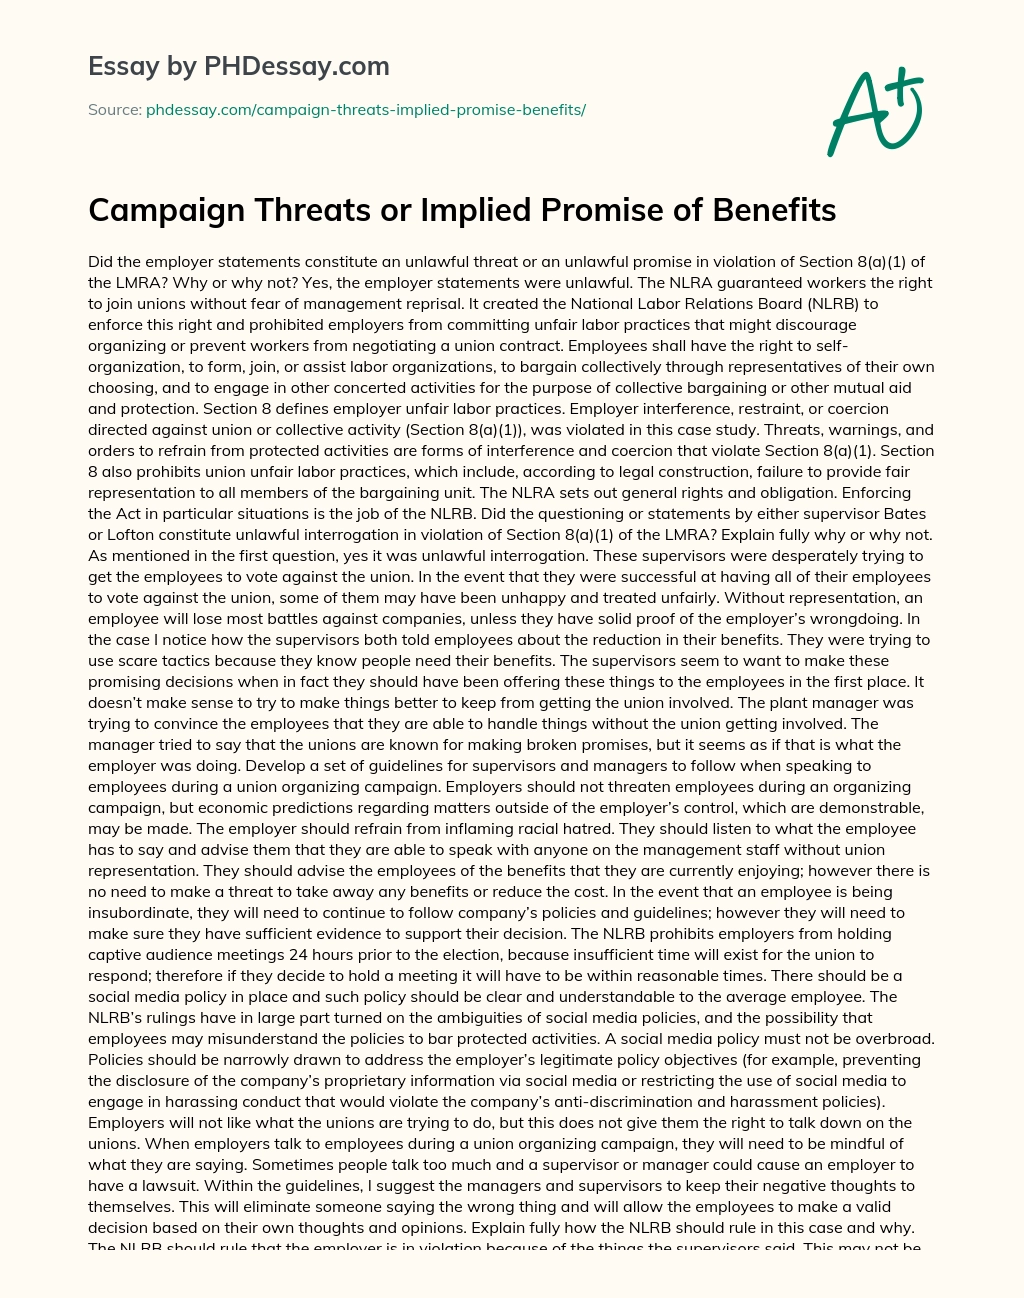 Campaign Threats or Implied Promise of Benefits essay